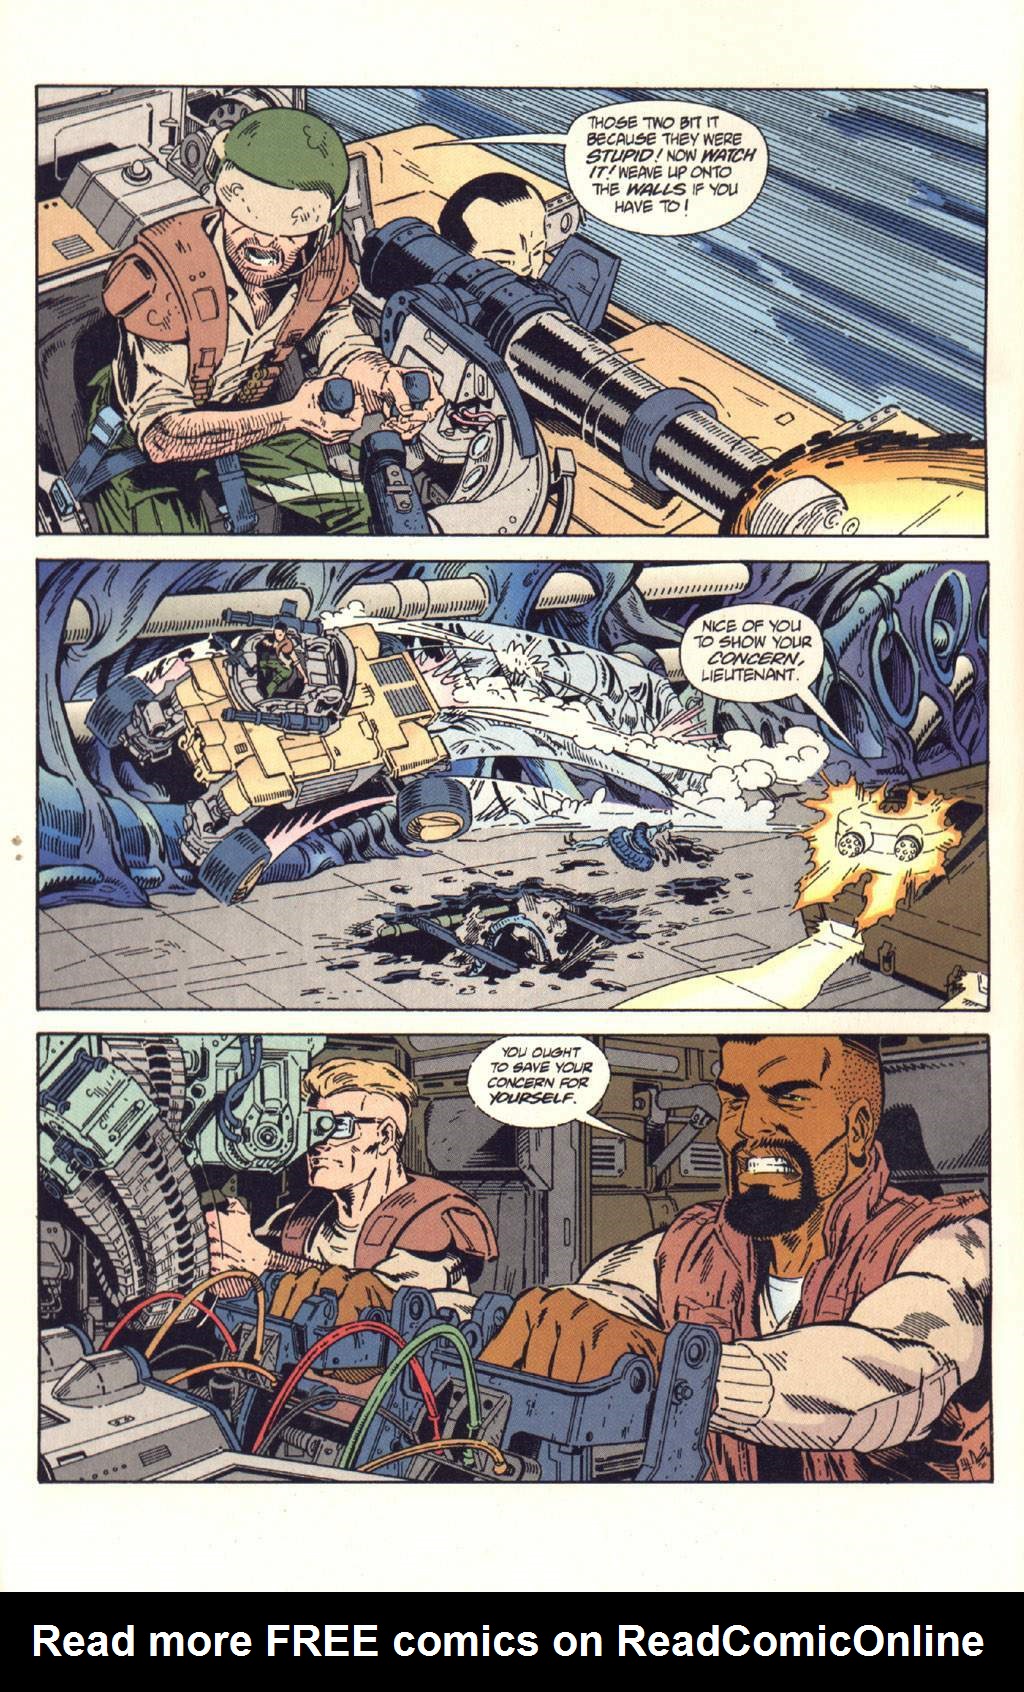 Aliens Colonial Marines Issue 10 | Read Aliens Colonial Marines Issue 10  comic online in high quality. Read Full Comic online for free - Read comics  online in high quality .| READ COMIC ONLINE